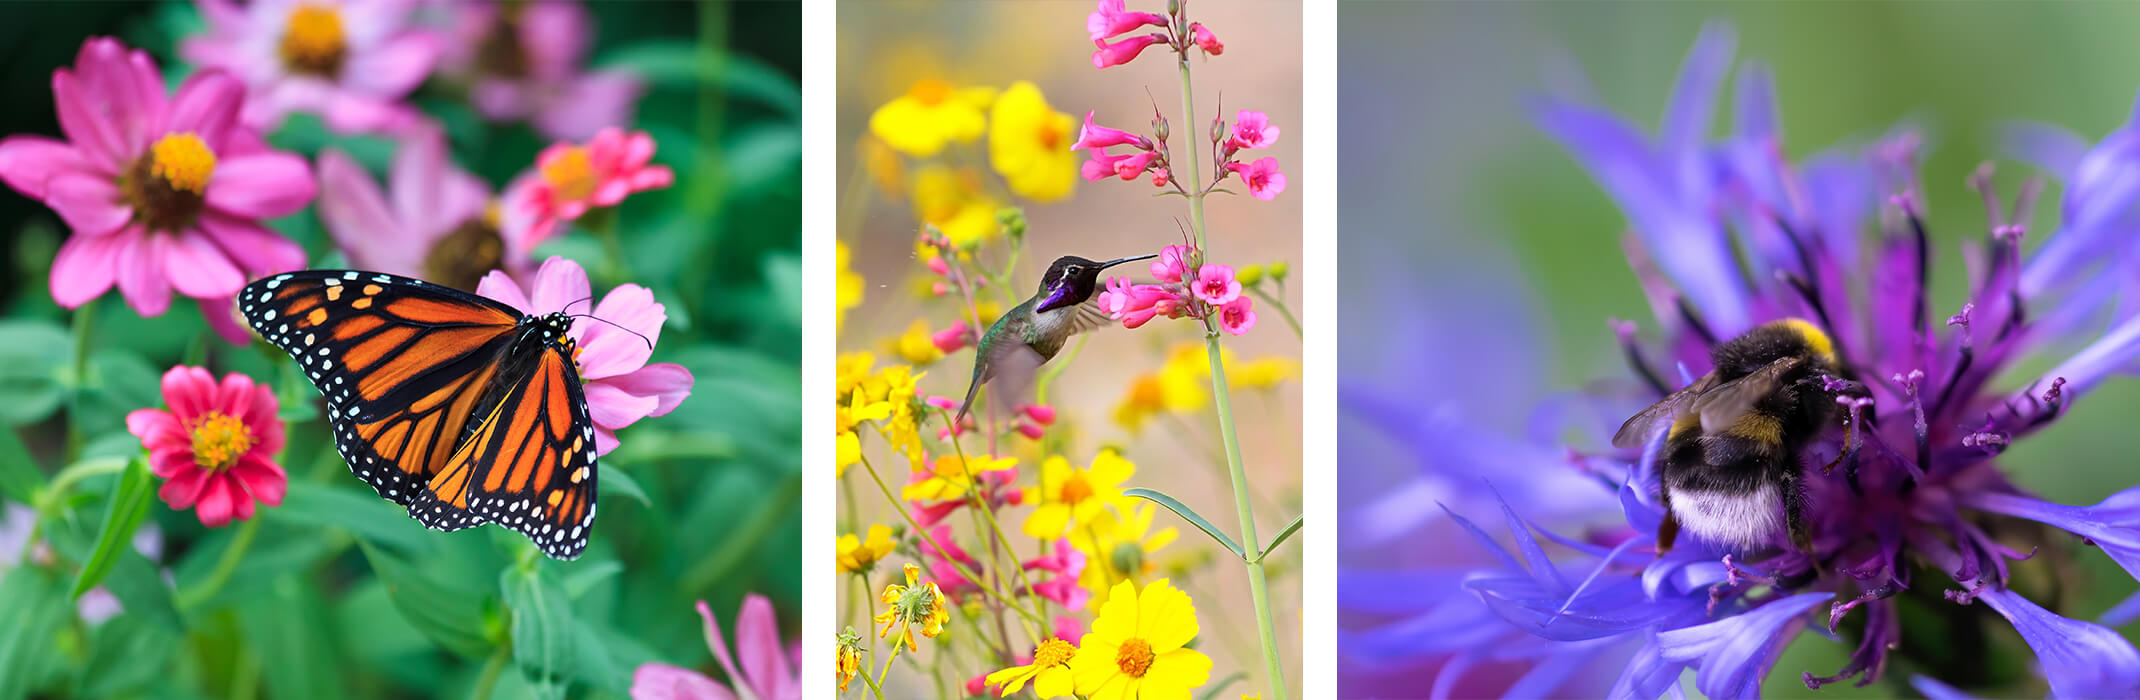 3 images: monarch on pink cosmos flowers, hummingbird on pink penstemon flowers with yellow flowers in the background, and a bee on a purple bachelor's button flower